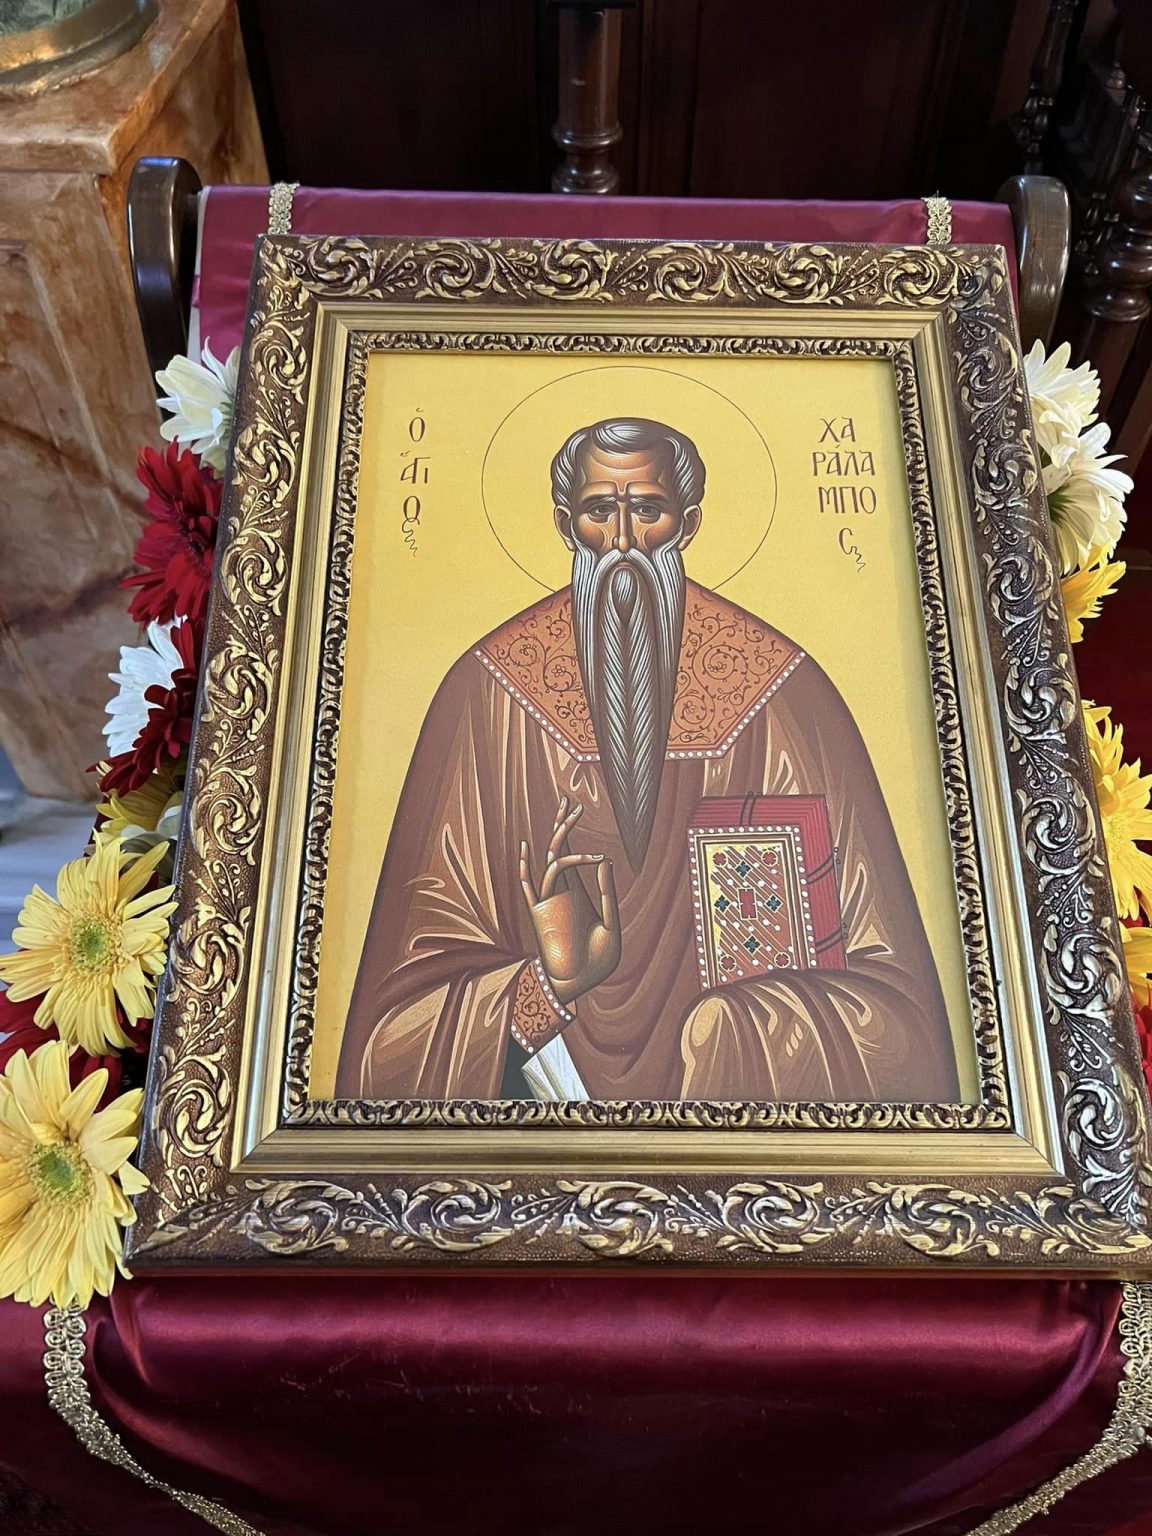 The Feast Day of Saint Haralambos in Makrohorion, Constantinople